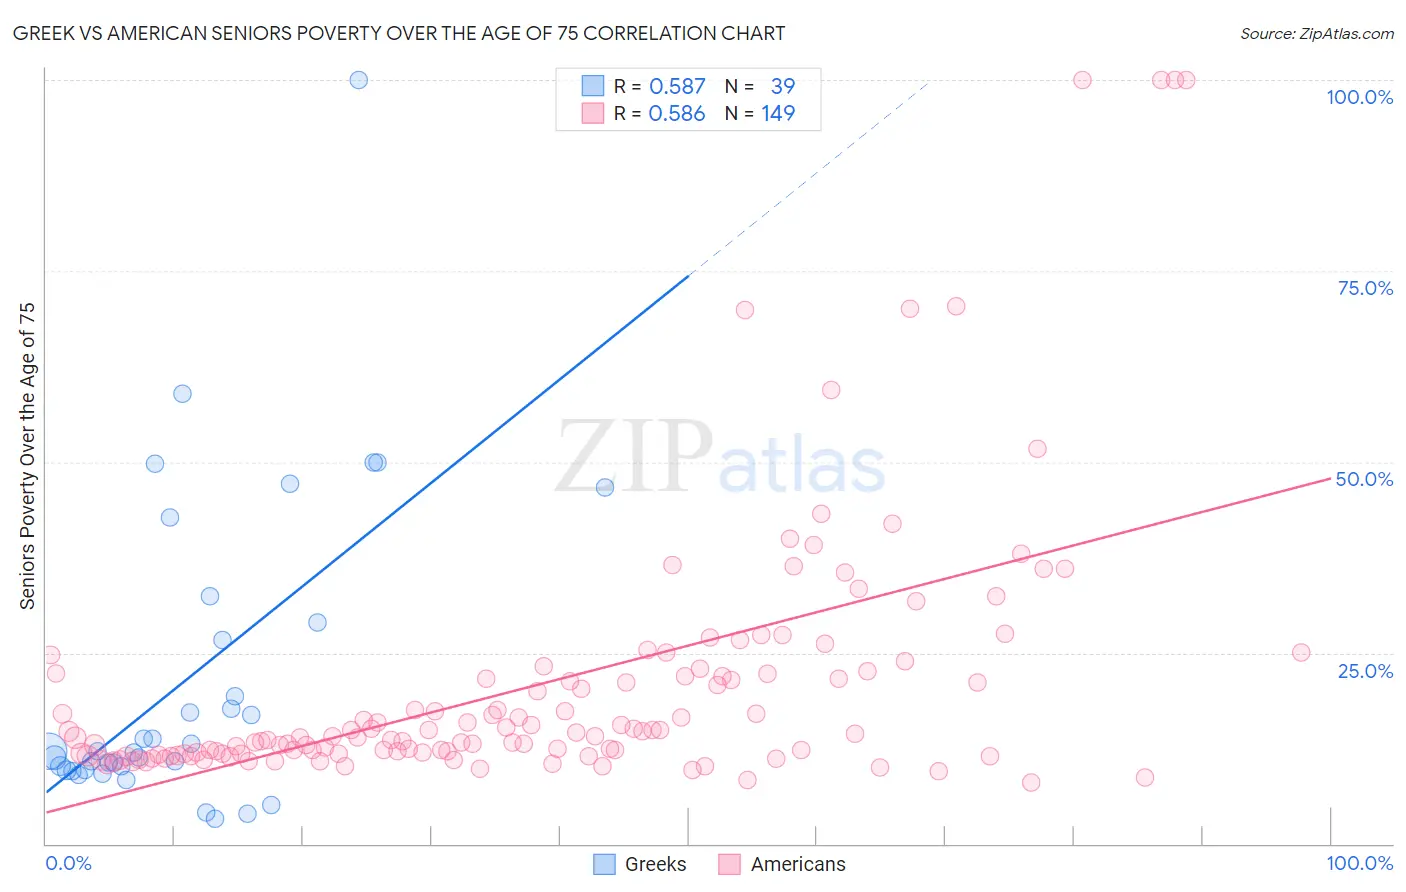 Greek vs American Seniors Poverty Over the Age of 75